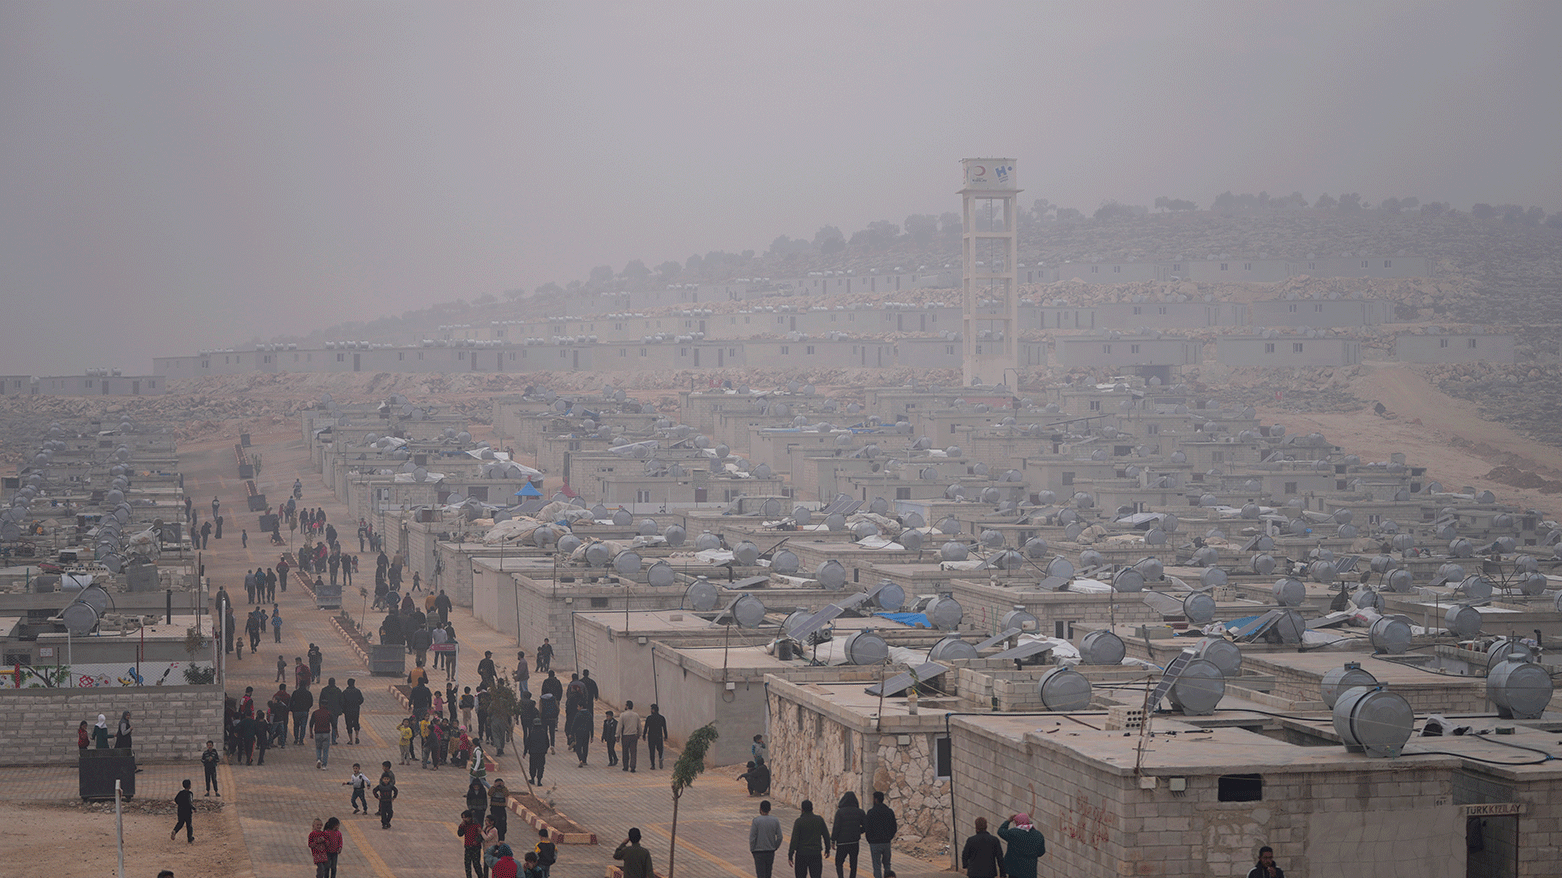 Syrians walk along in a refugee camp for displaced people run by the Turkish Red Crescent in Sarmada district, north of Idlib city, Syria, on Nov. 26, 2021. (Photo: AP)